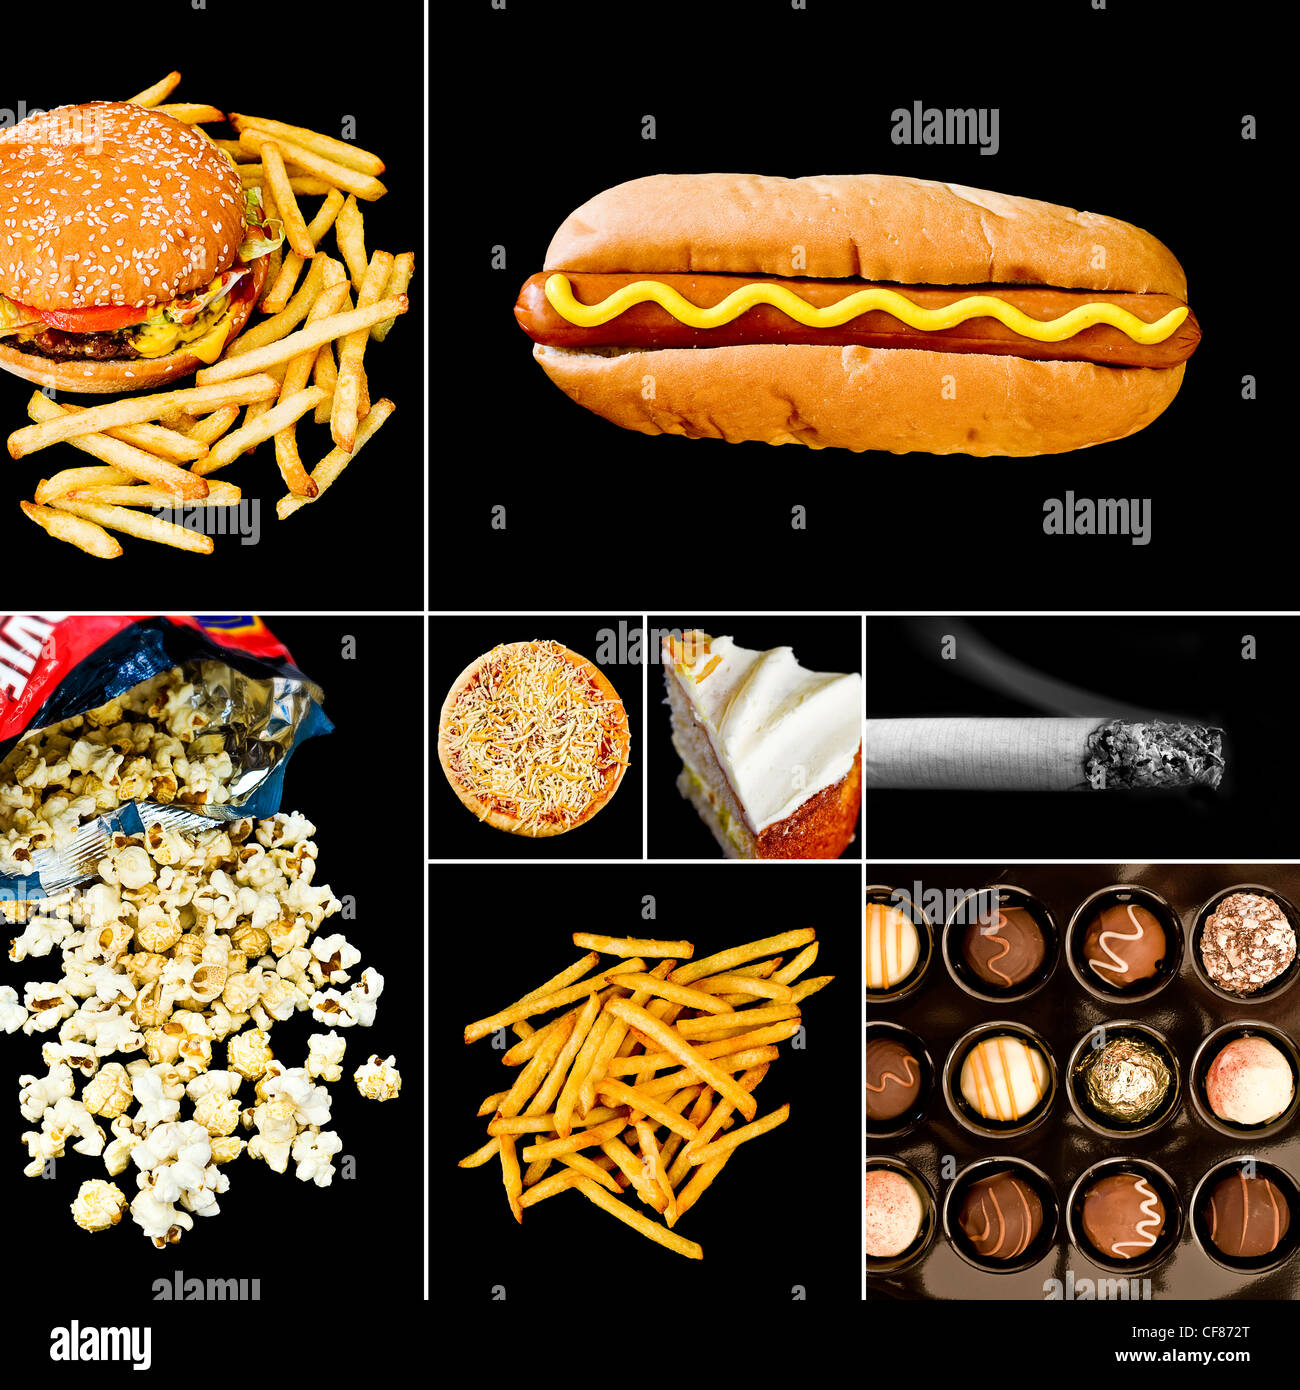 Unhealthy Food Collage